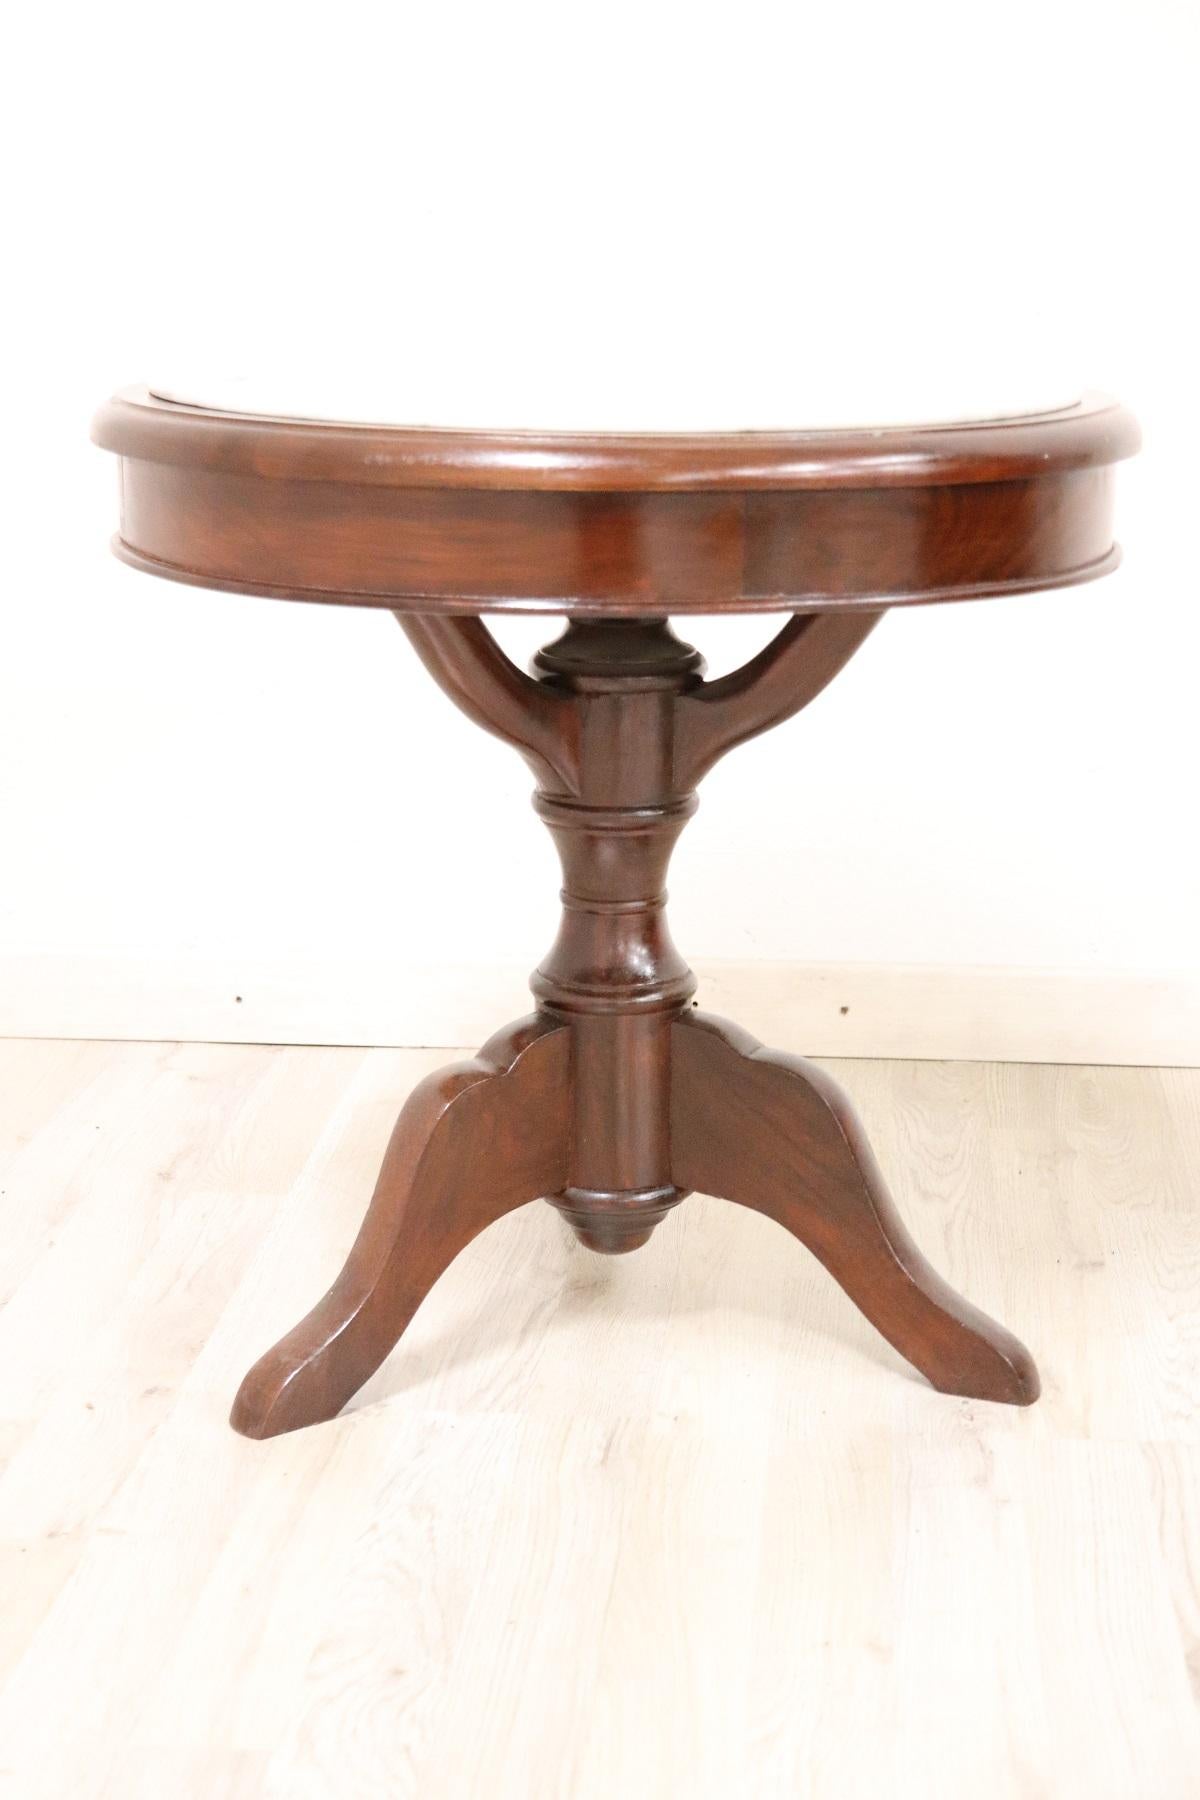 Rare and fine quality Italian 1880s round sofa table or coffee table. The table in precious mahogany wood with finely turned central pedestal. The support surface is in Italian white Carrara marble. Perfect condition ready to be placed in your